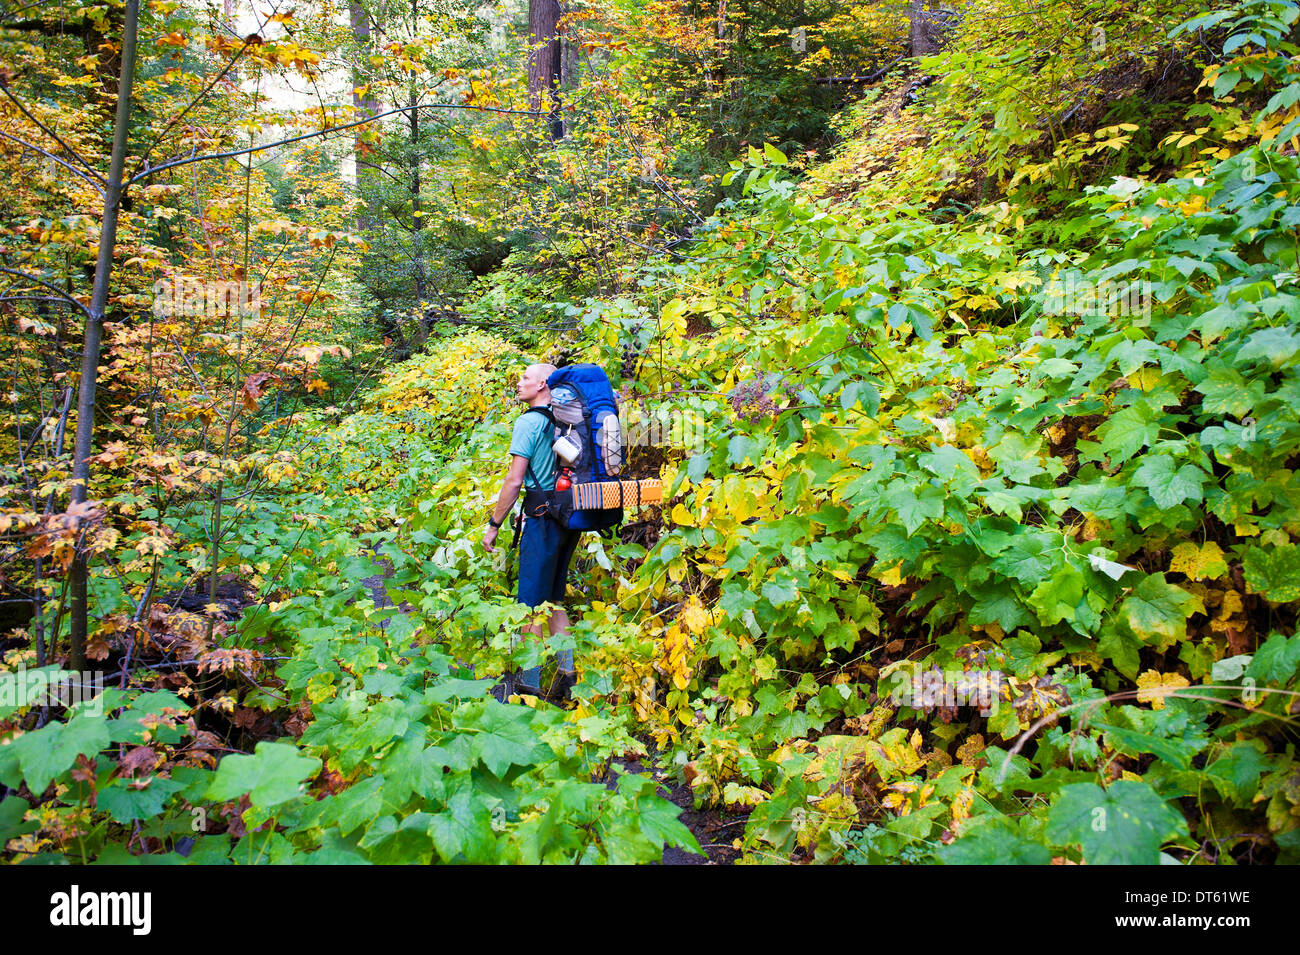 Young male hiker in forest, Trinity Alps, California, USA Stock Photo